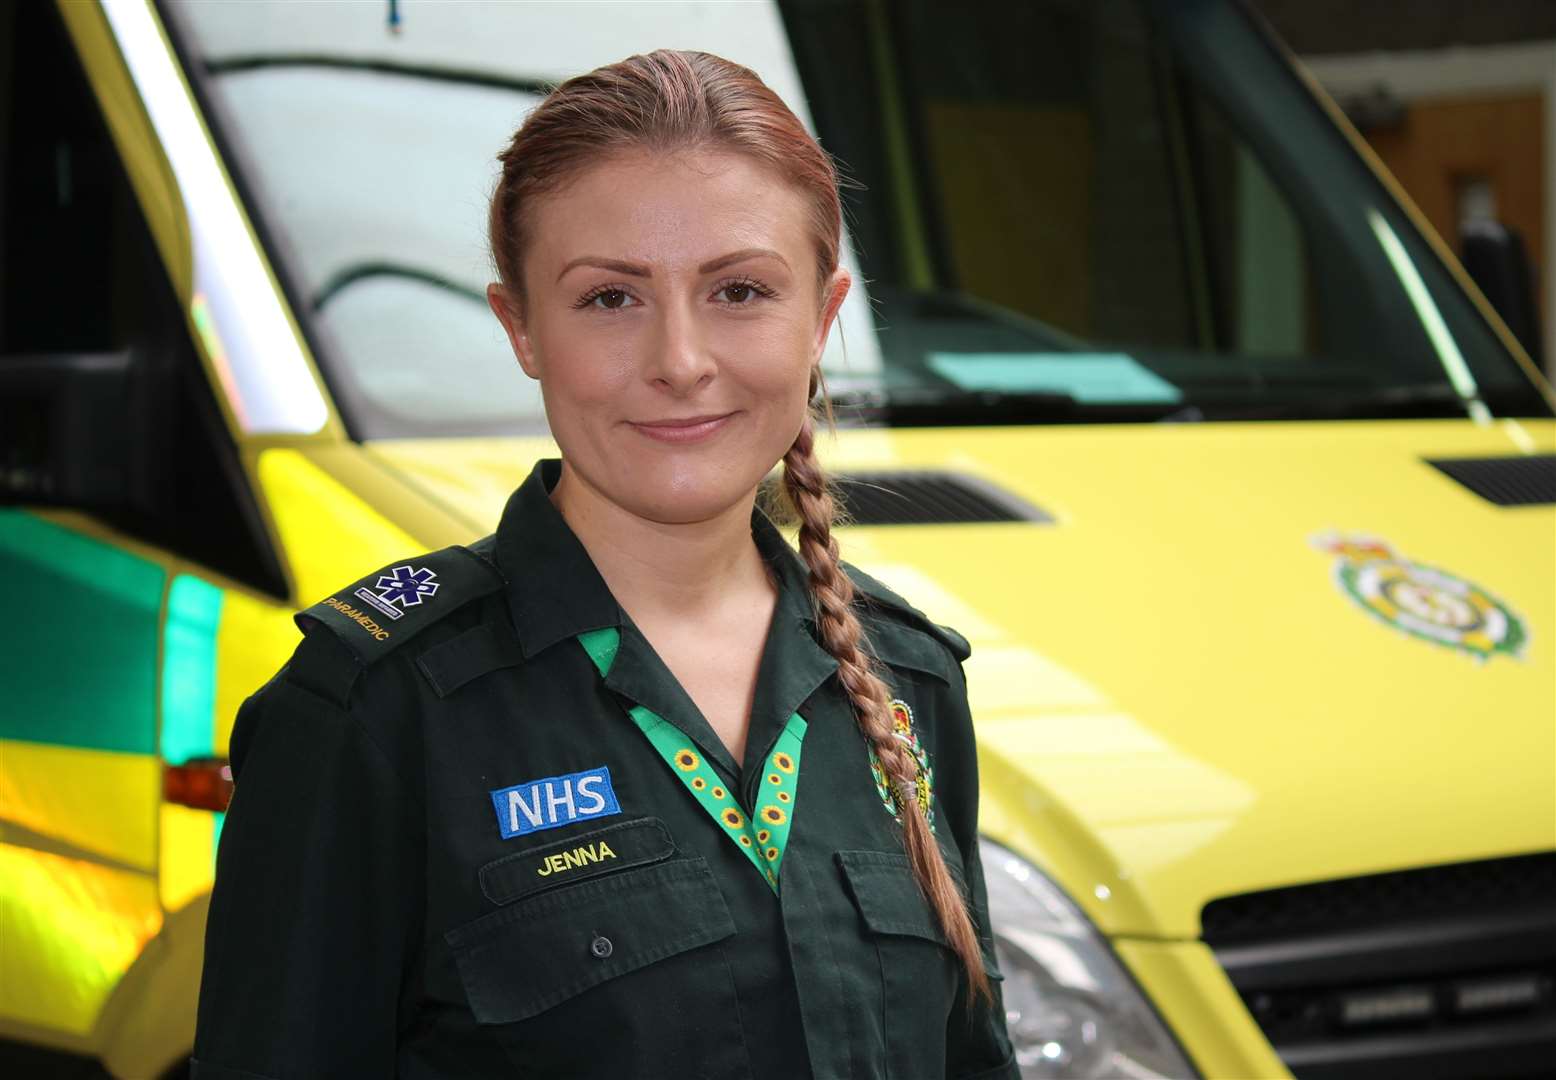 Jenna Gibson is blazing a trail deaf and hearing impaired ambulance workers.